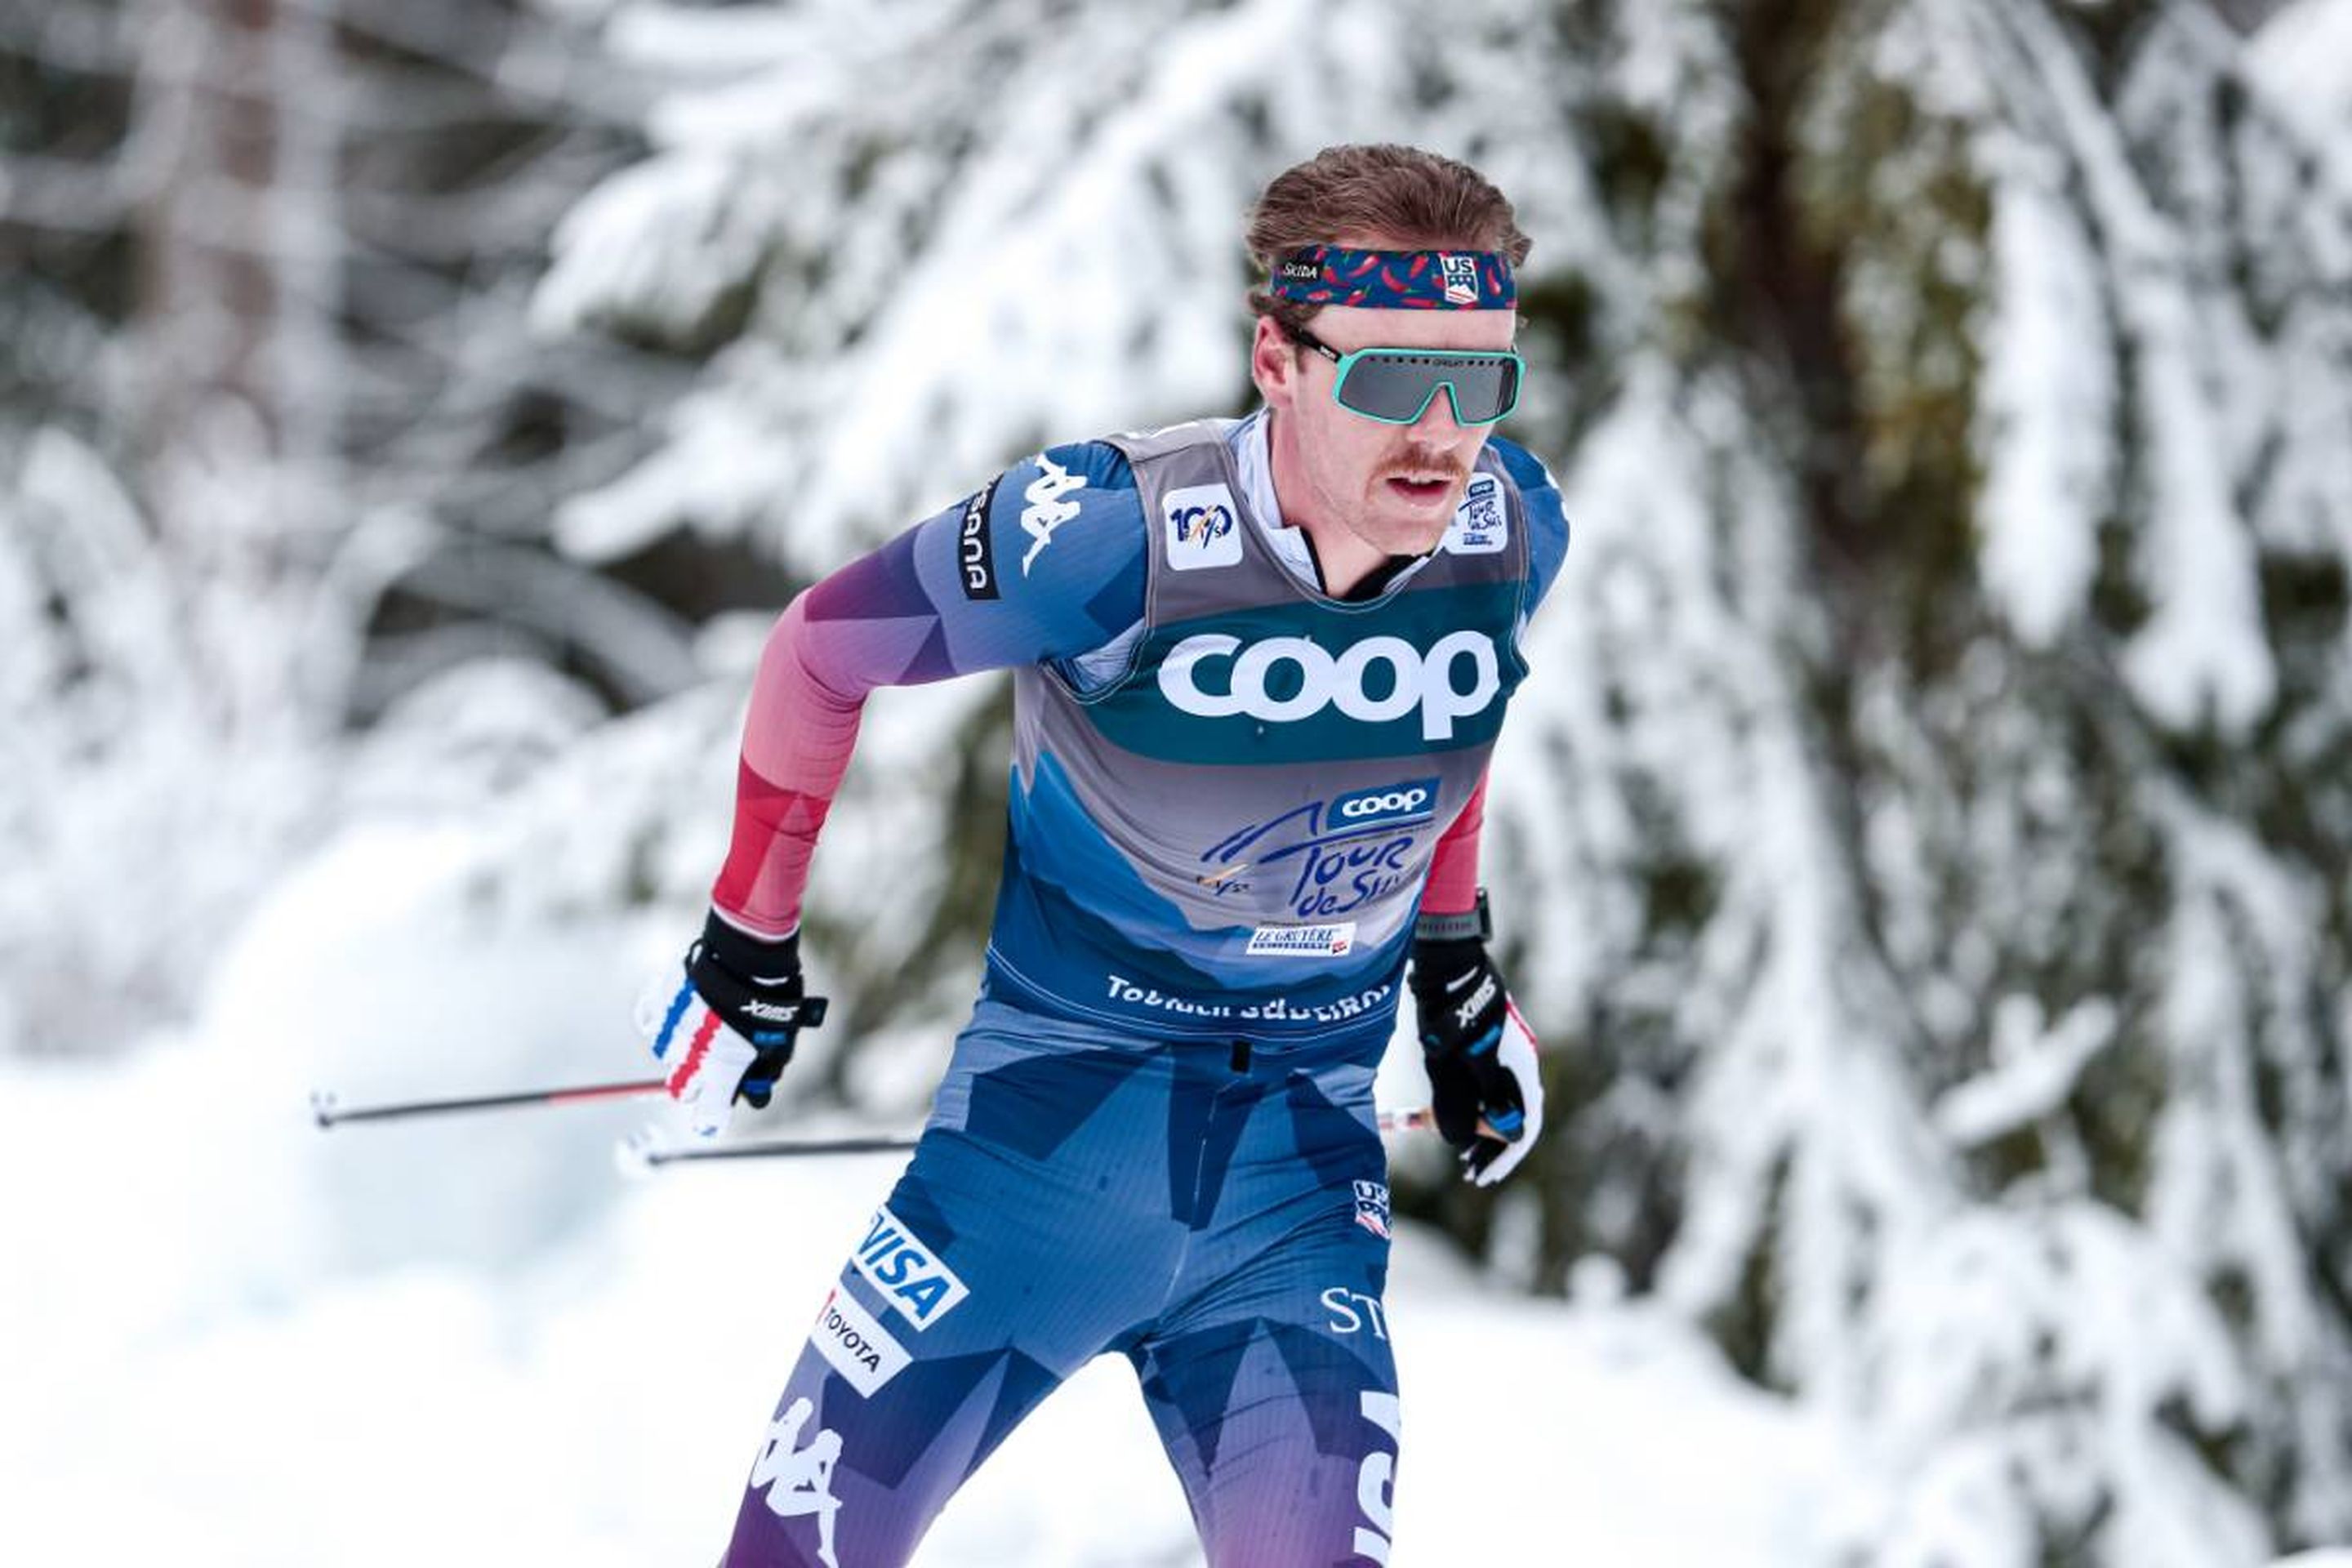 At 23, Ben Ogden (USA) will be hoping his podium in Toblach, Italy will be the first of many @ Nordic Focus